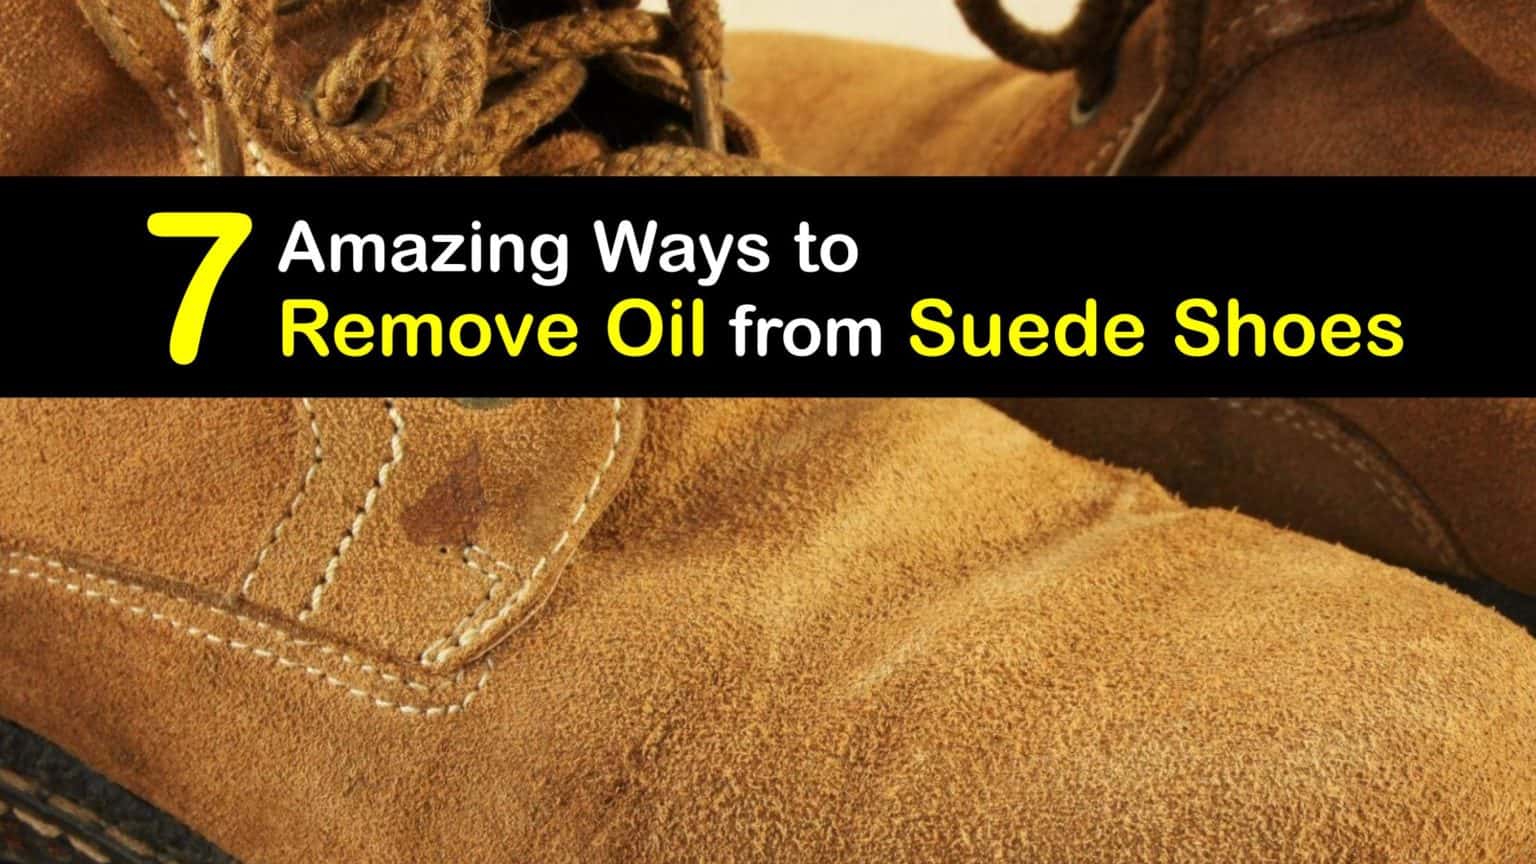 Suede Shoe Stains - Easy Ways to Remove Oil from Suede Shoes